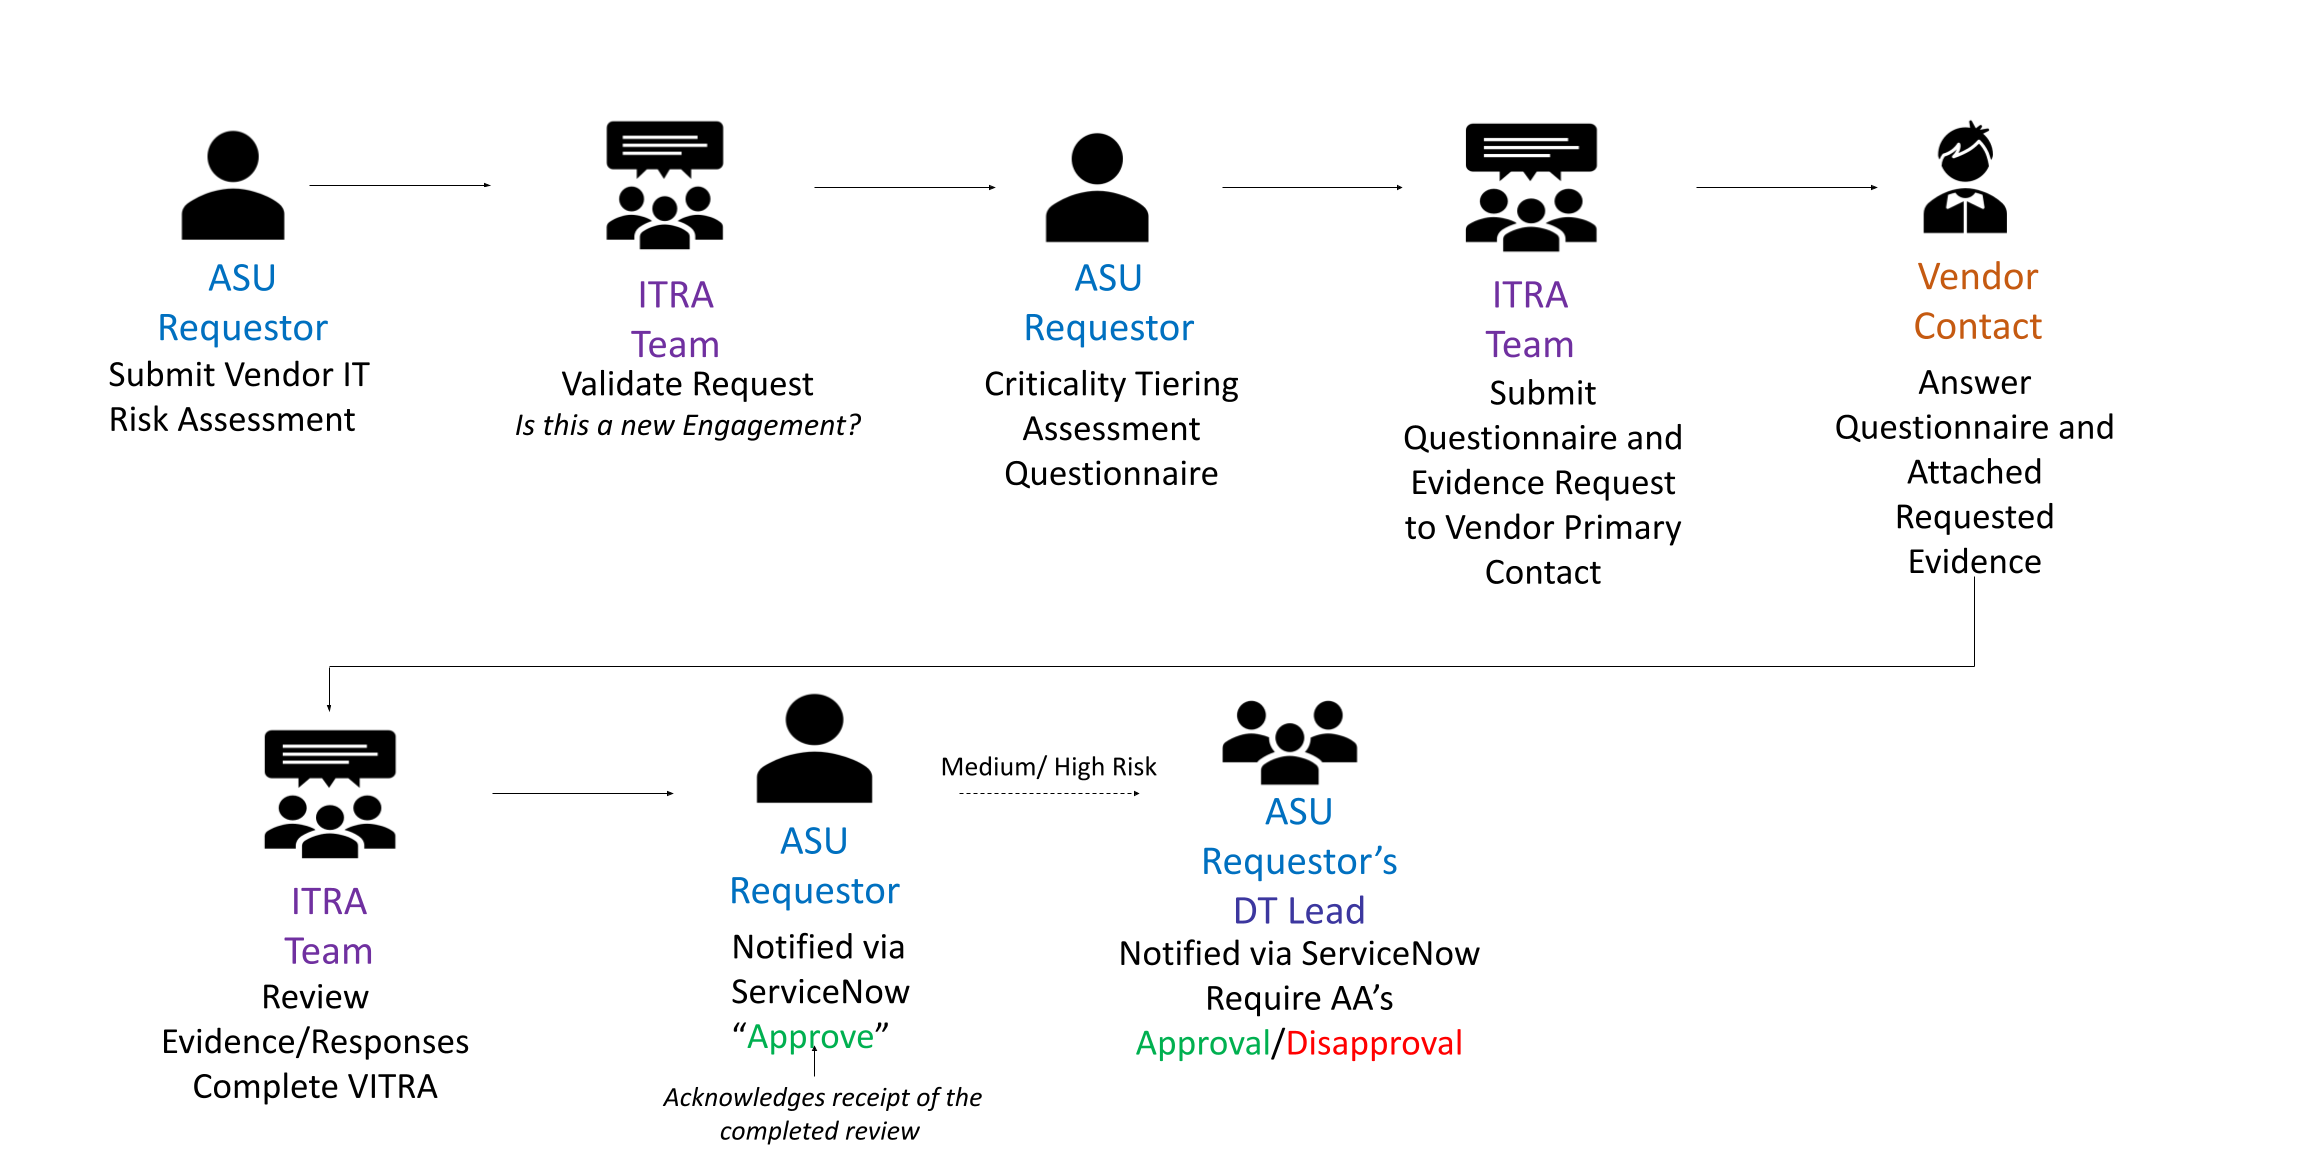 There are eight steps to the process with action items distributed between the originating ASU requester, the IT Risk Assessments team, the vendor, and the ASU requester's Distributed Technology Lead.